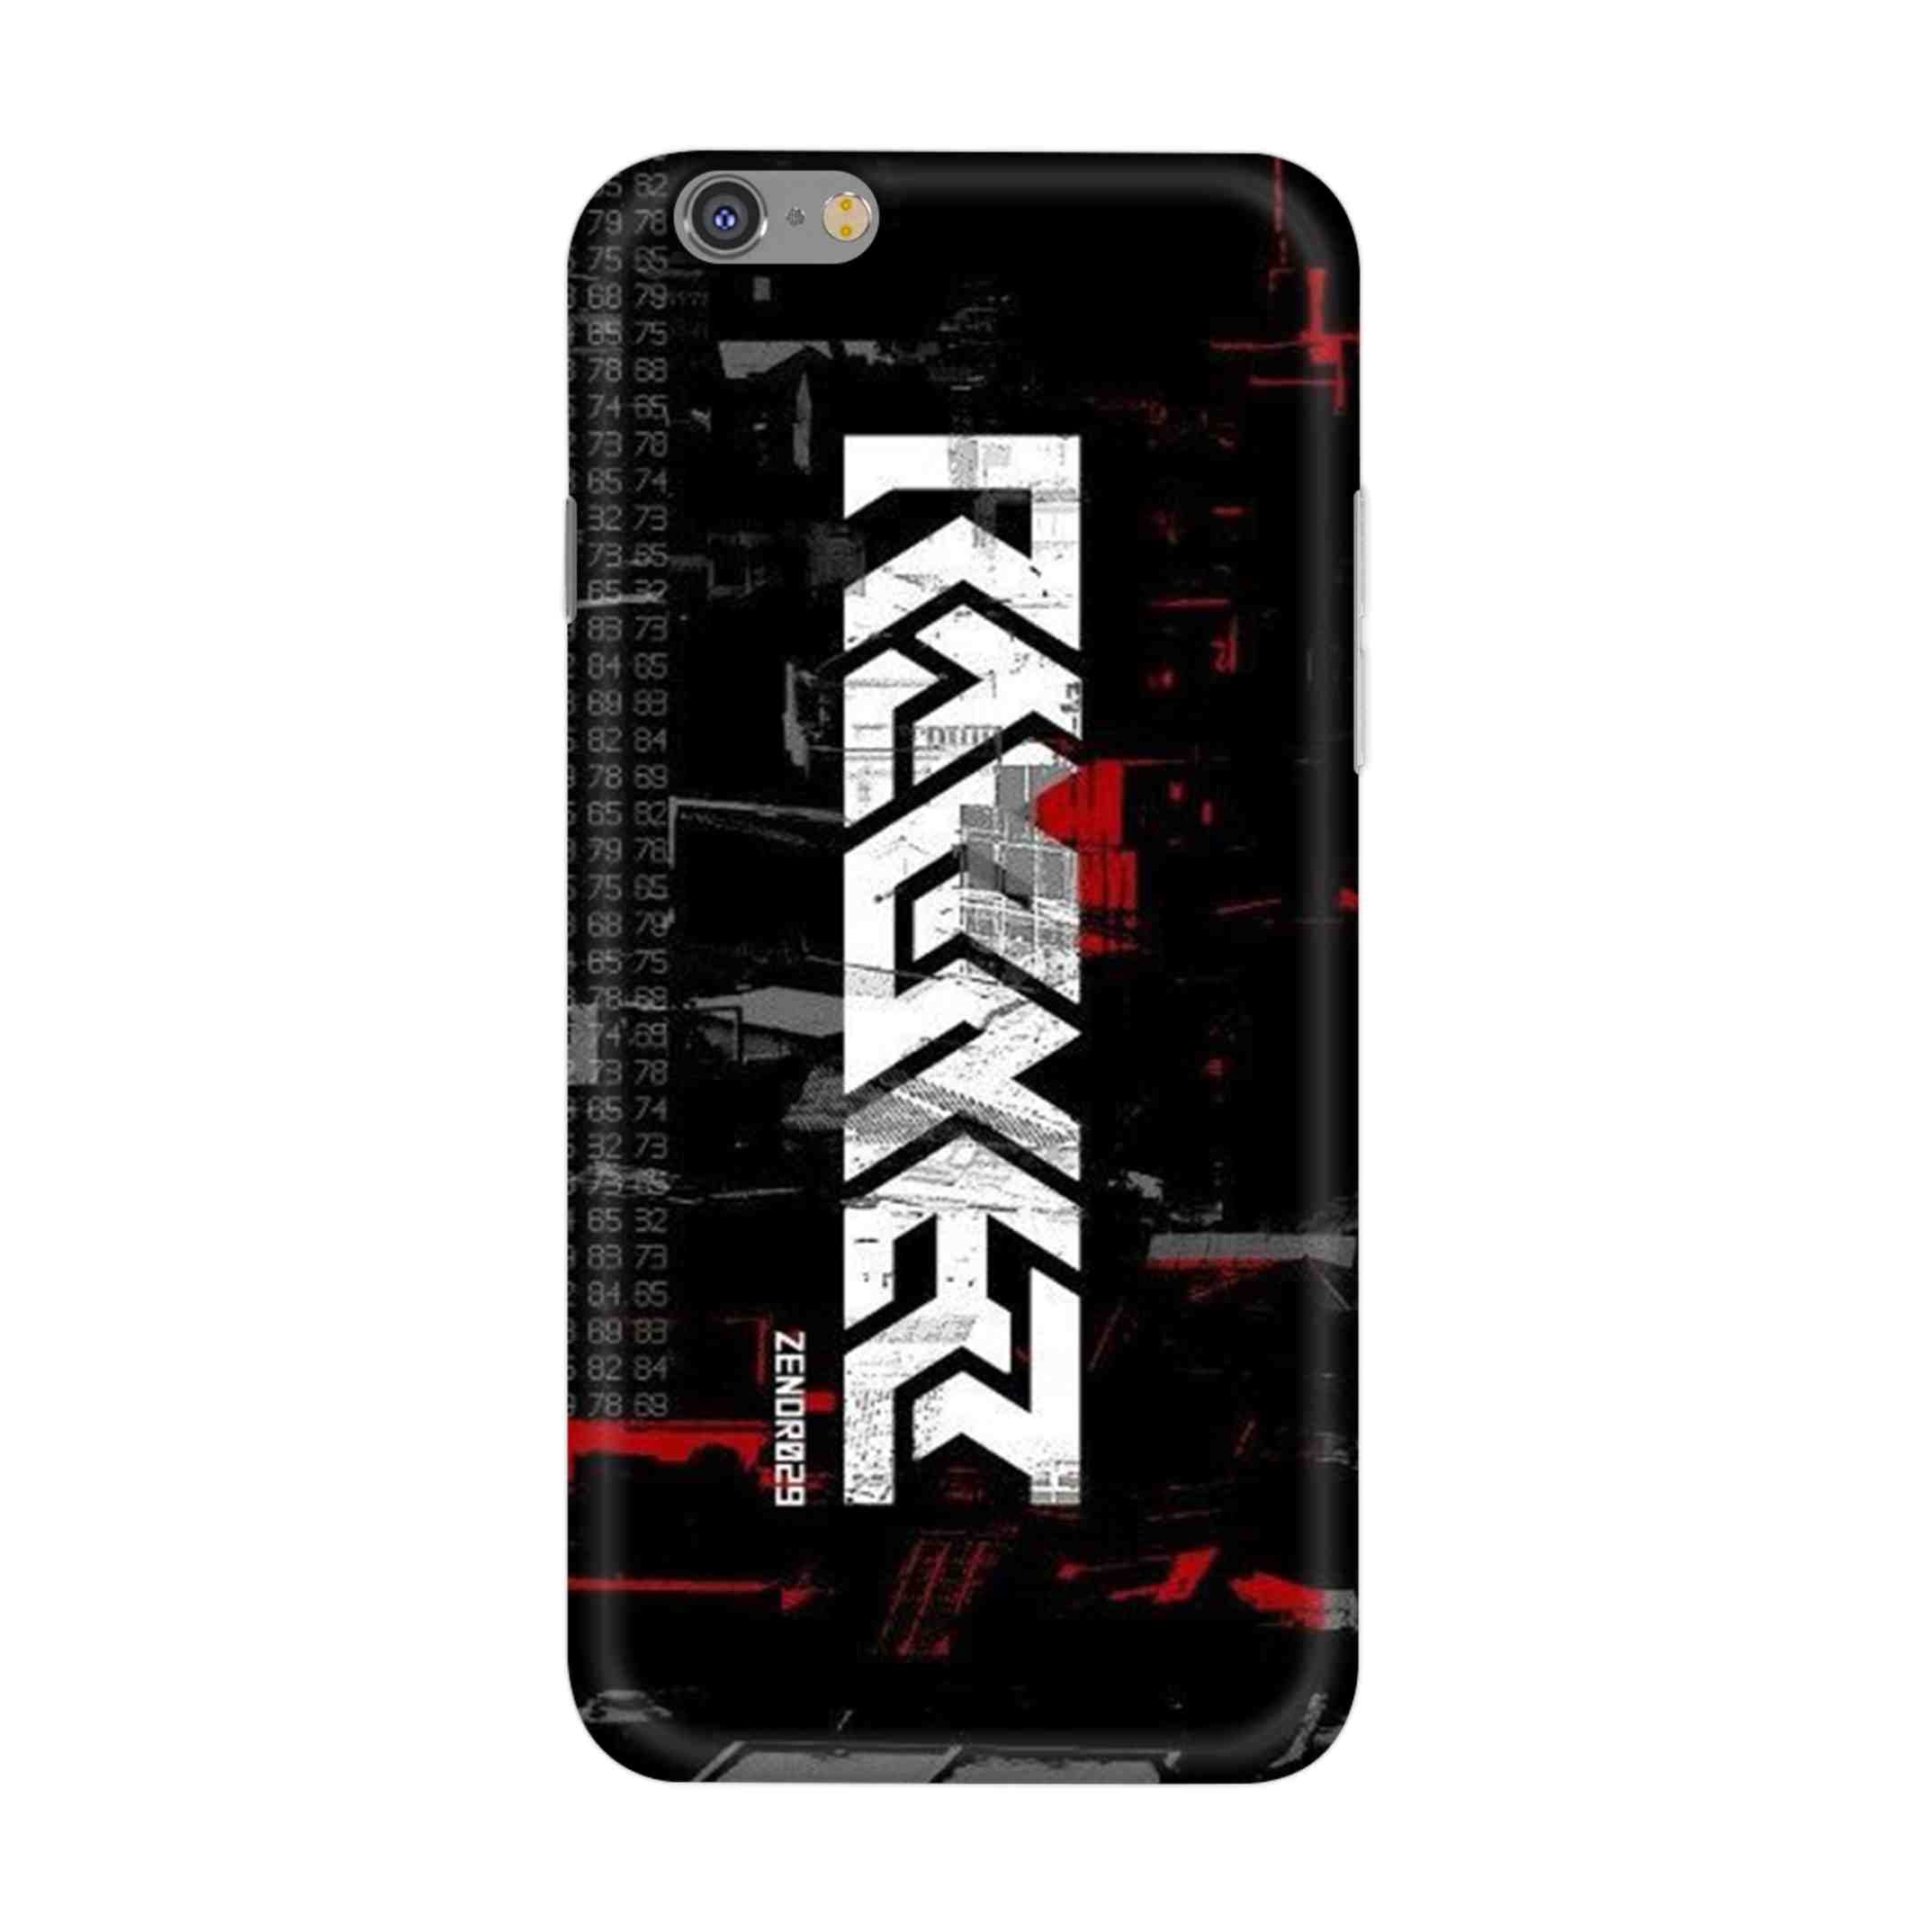 Buy Raxer Hard Back Mobile Phone Case/Cover For iPhone 6 Plus / 6s Plus Online